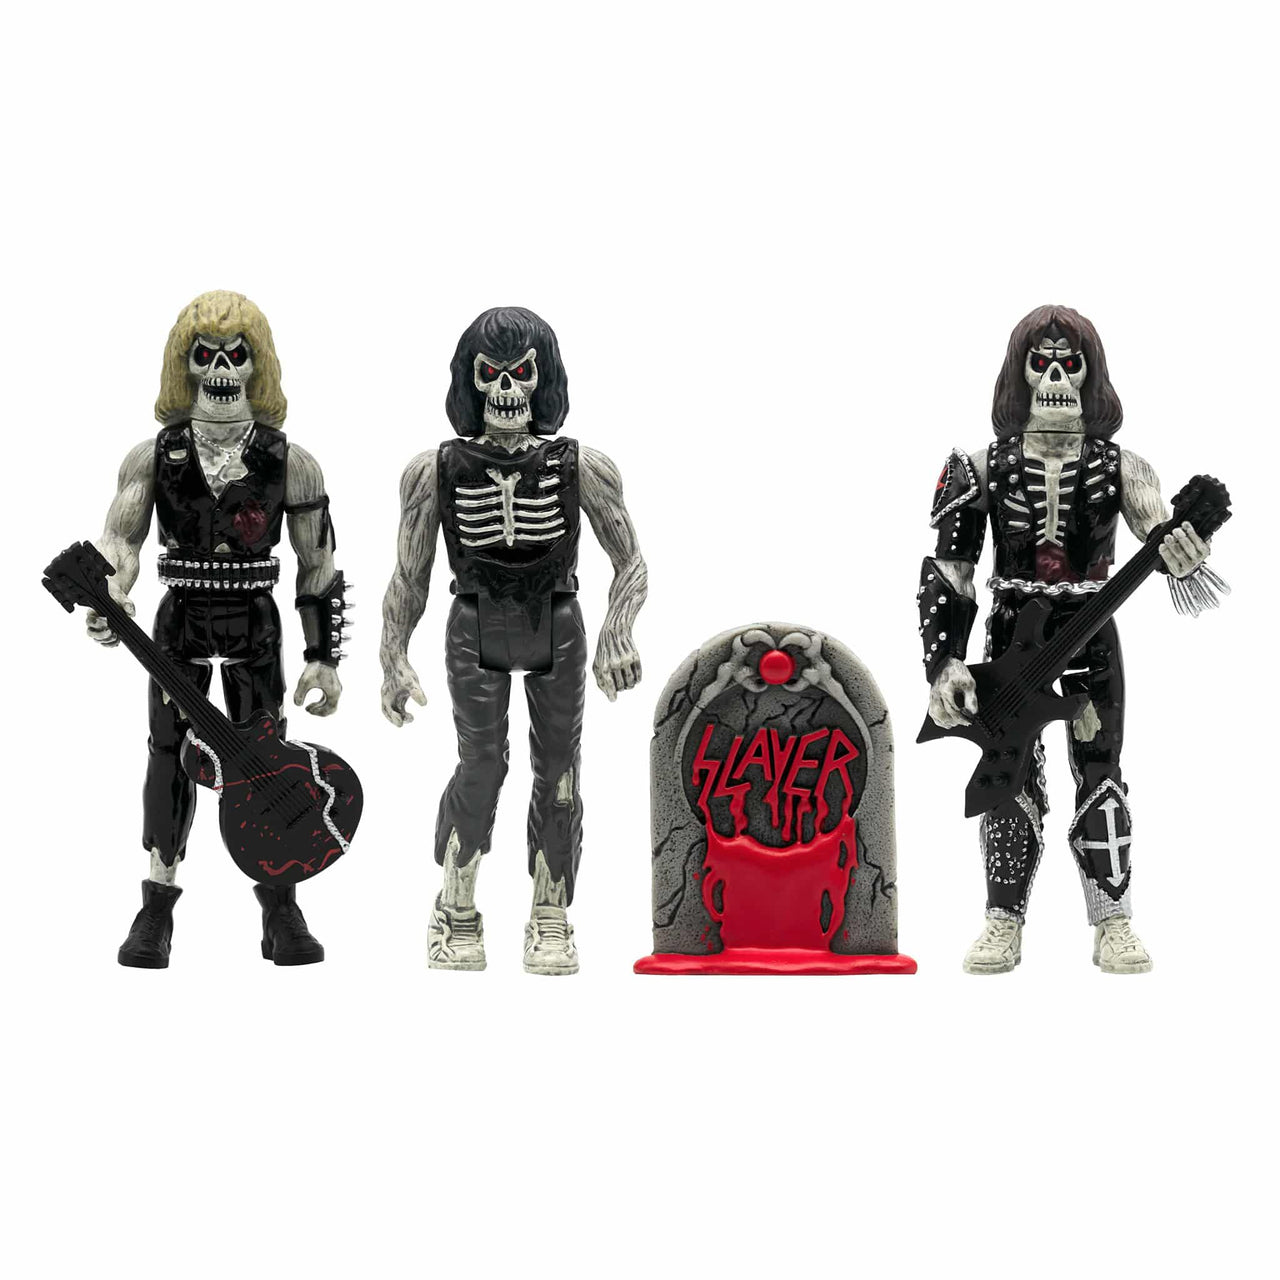 Slayer Live Undead Figurines all